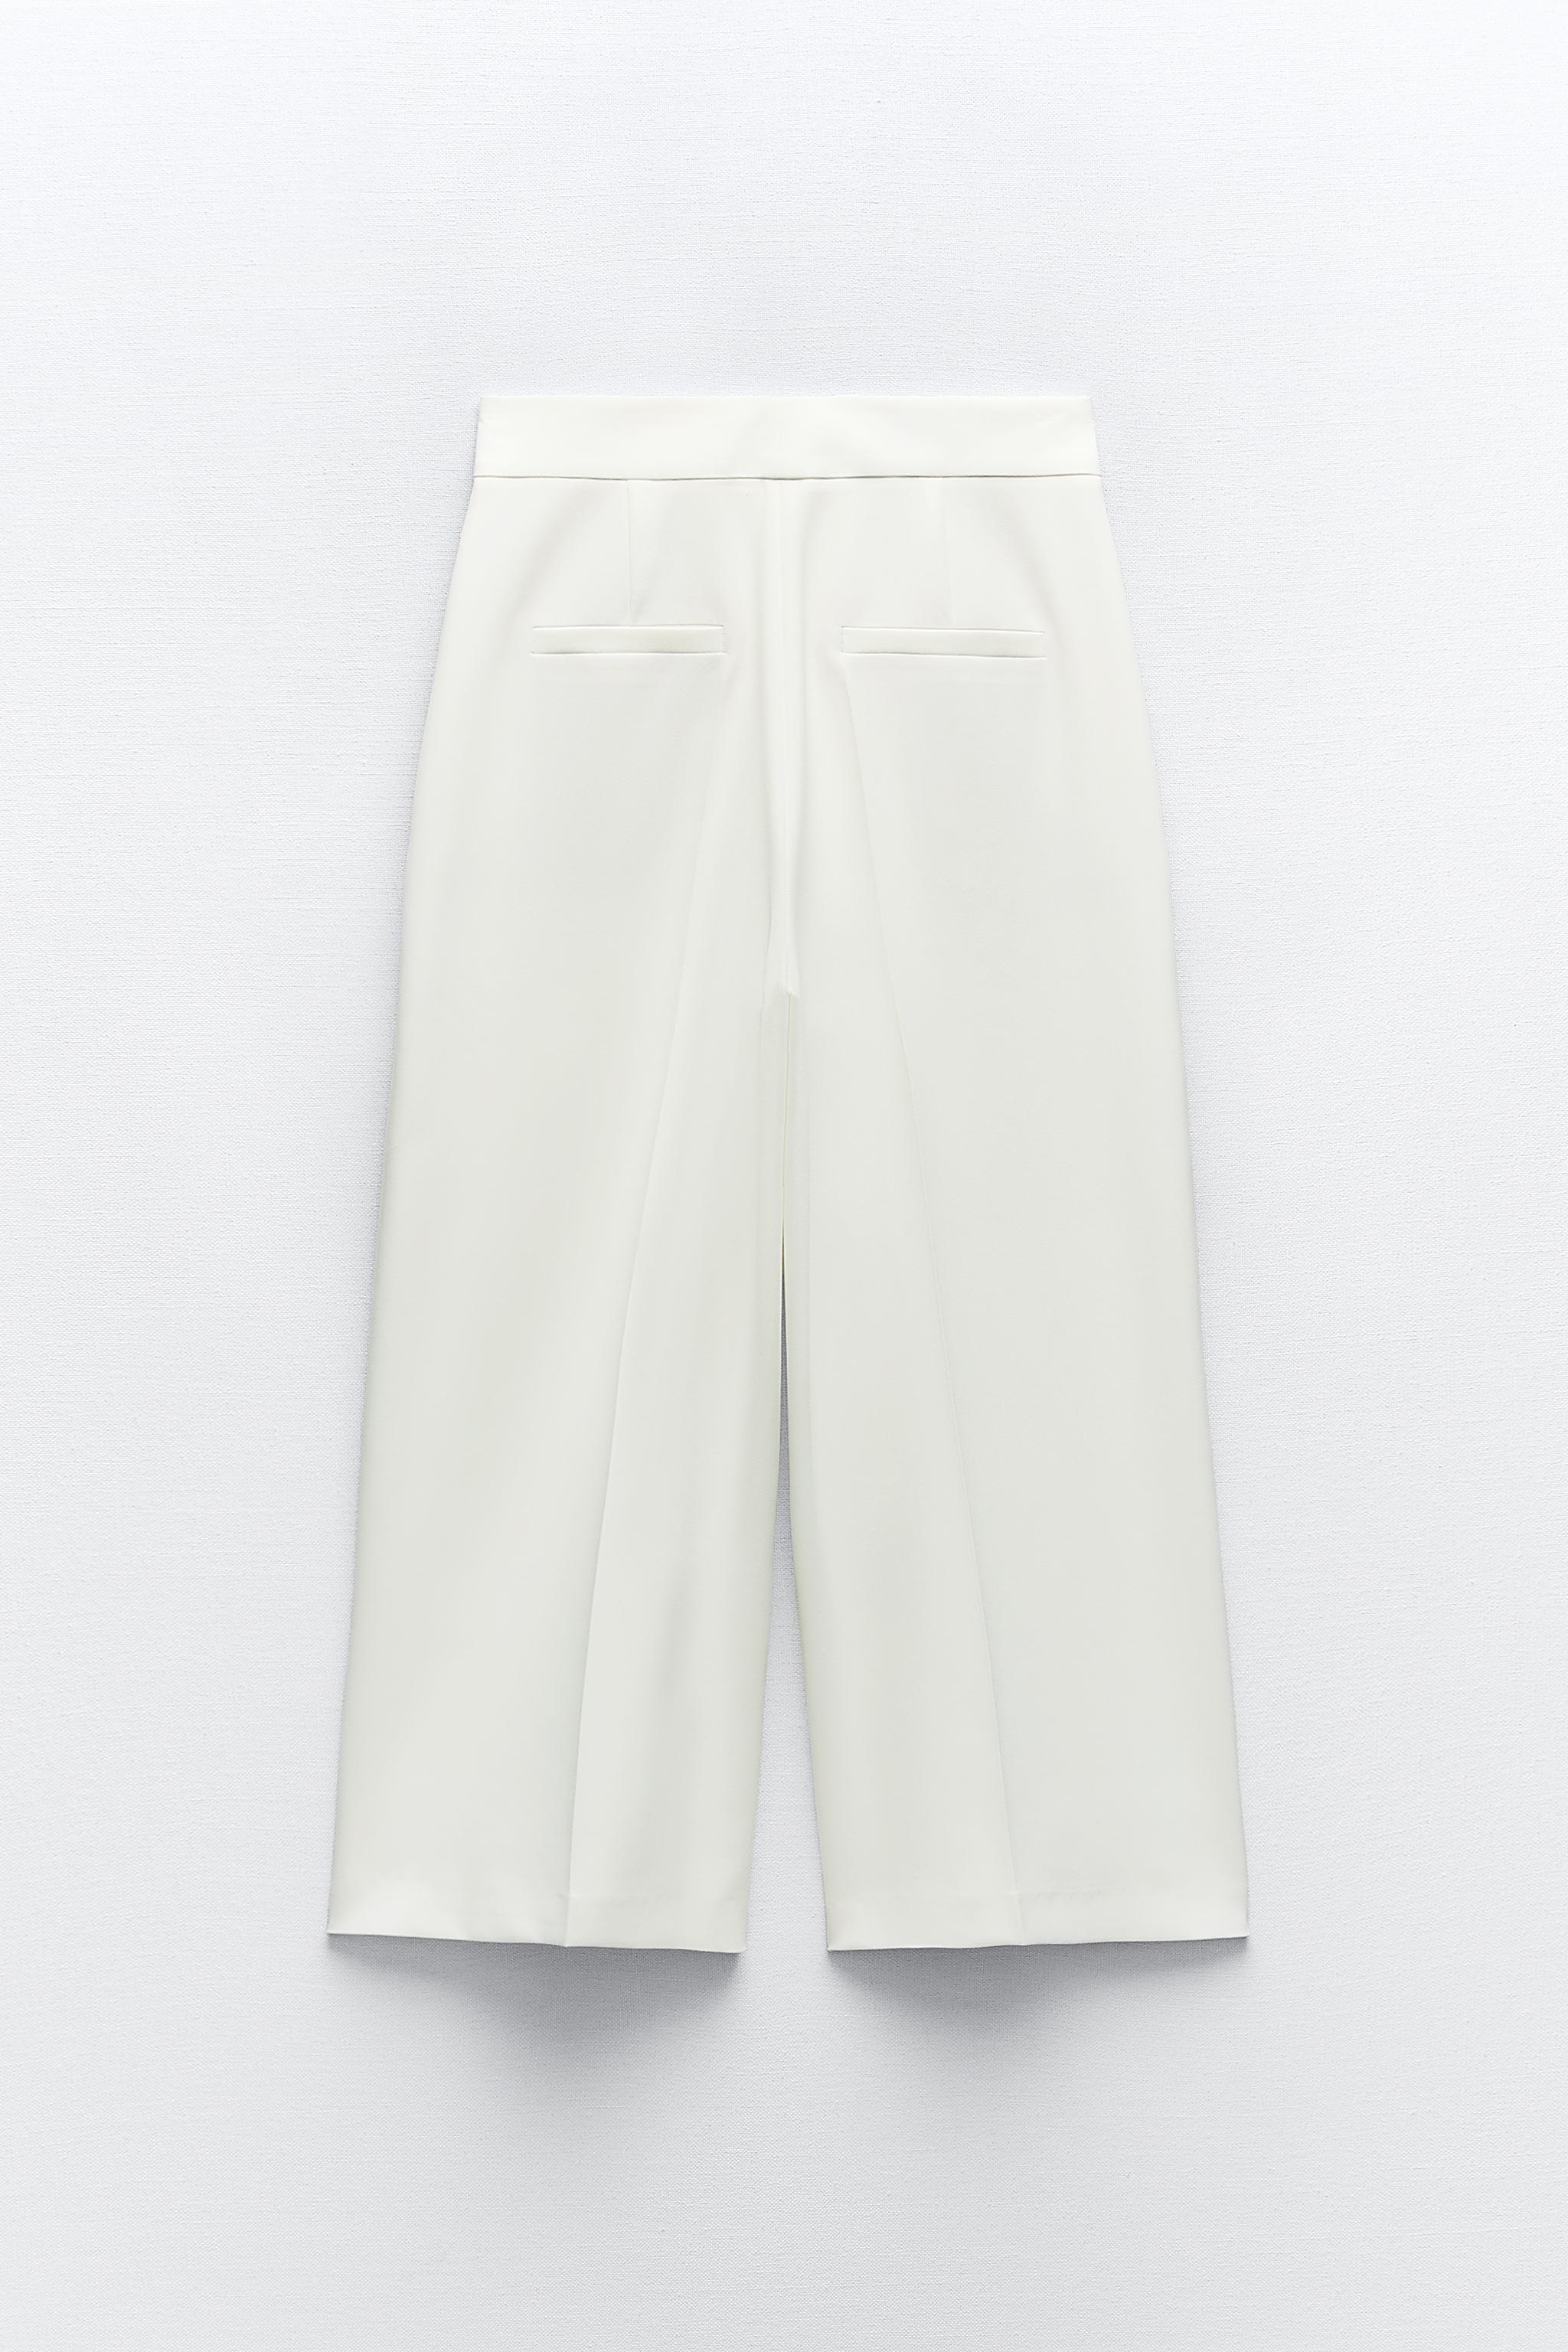 ZARA Woman TROUSERS, HIGH WAIST CULOTTE TROUSERS Oyster White